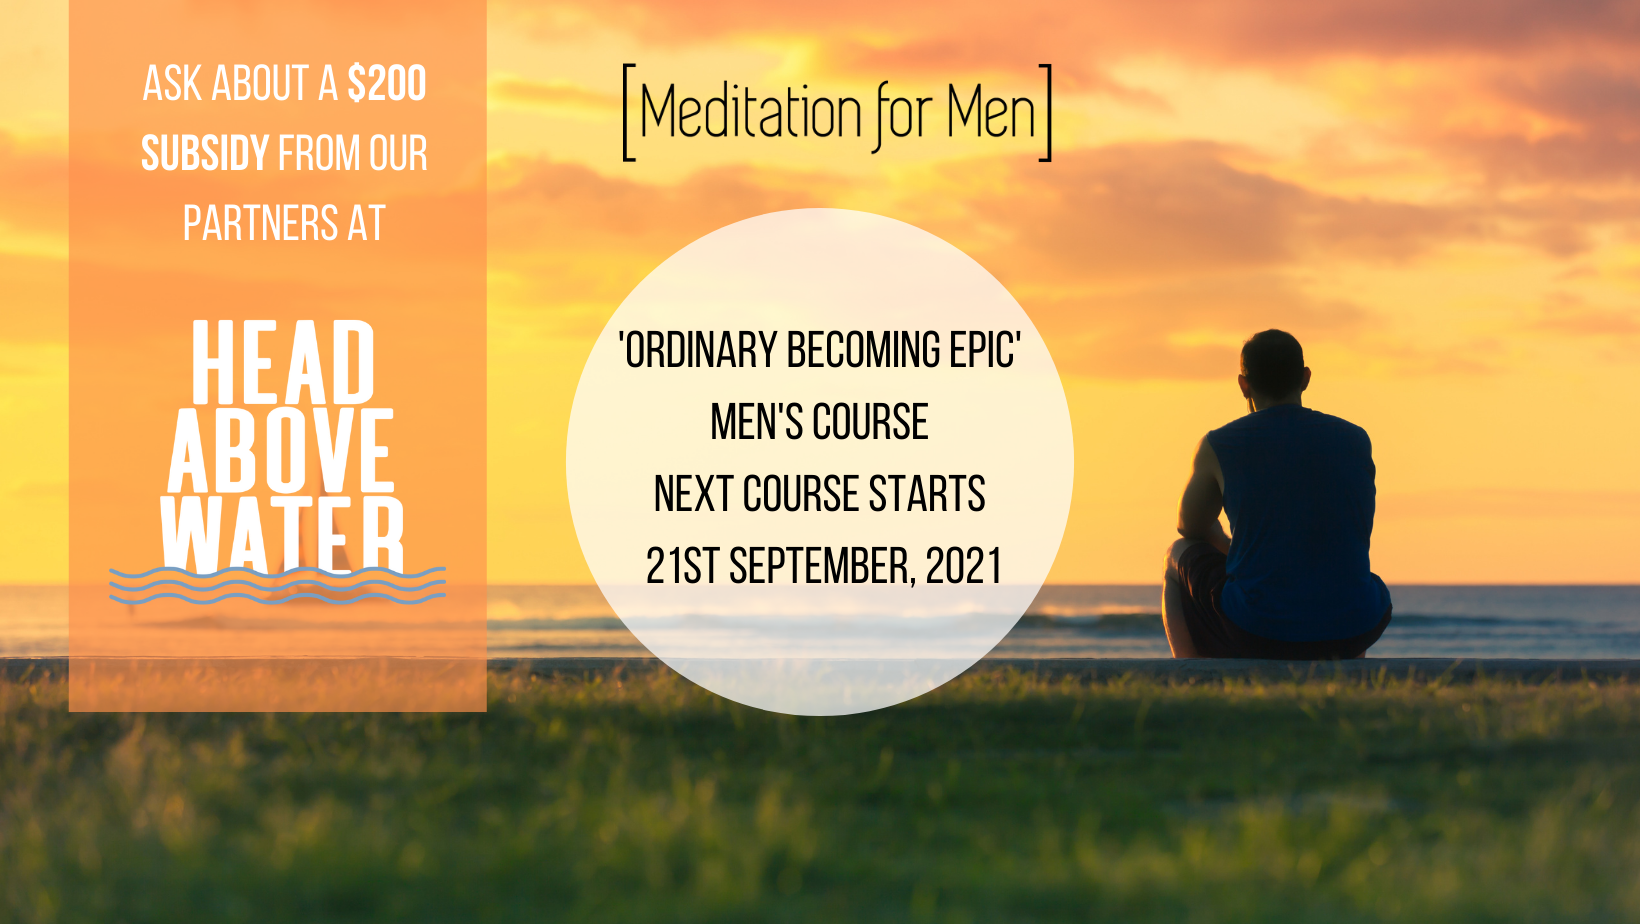 Men's 'Ordinary becoming EPIC' Course - Meditation, Breathwork, Life Skills and Tools Image